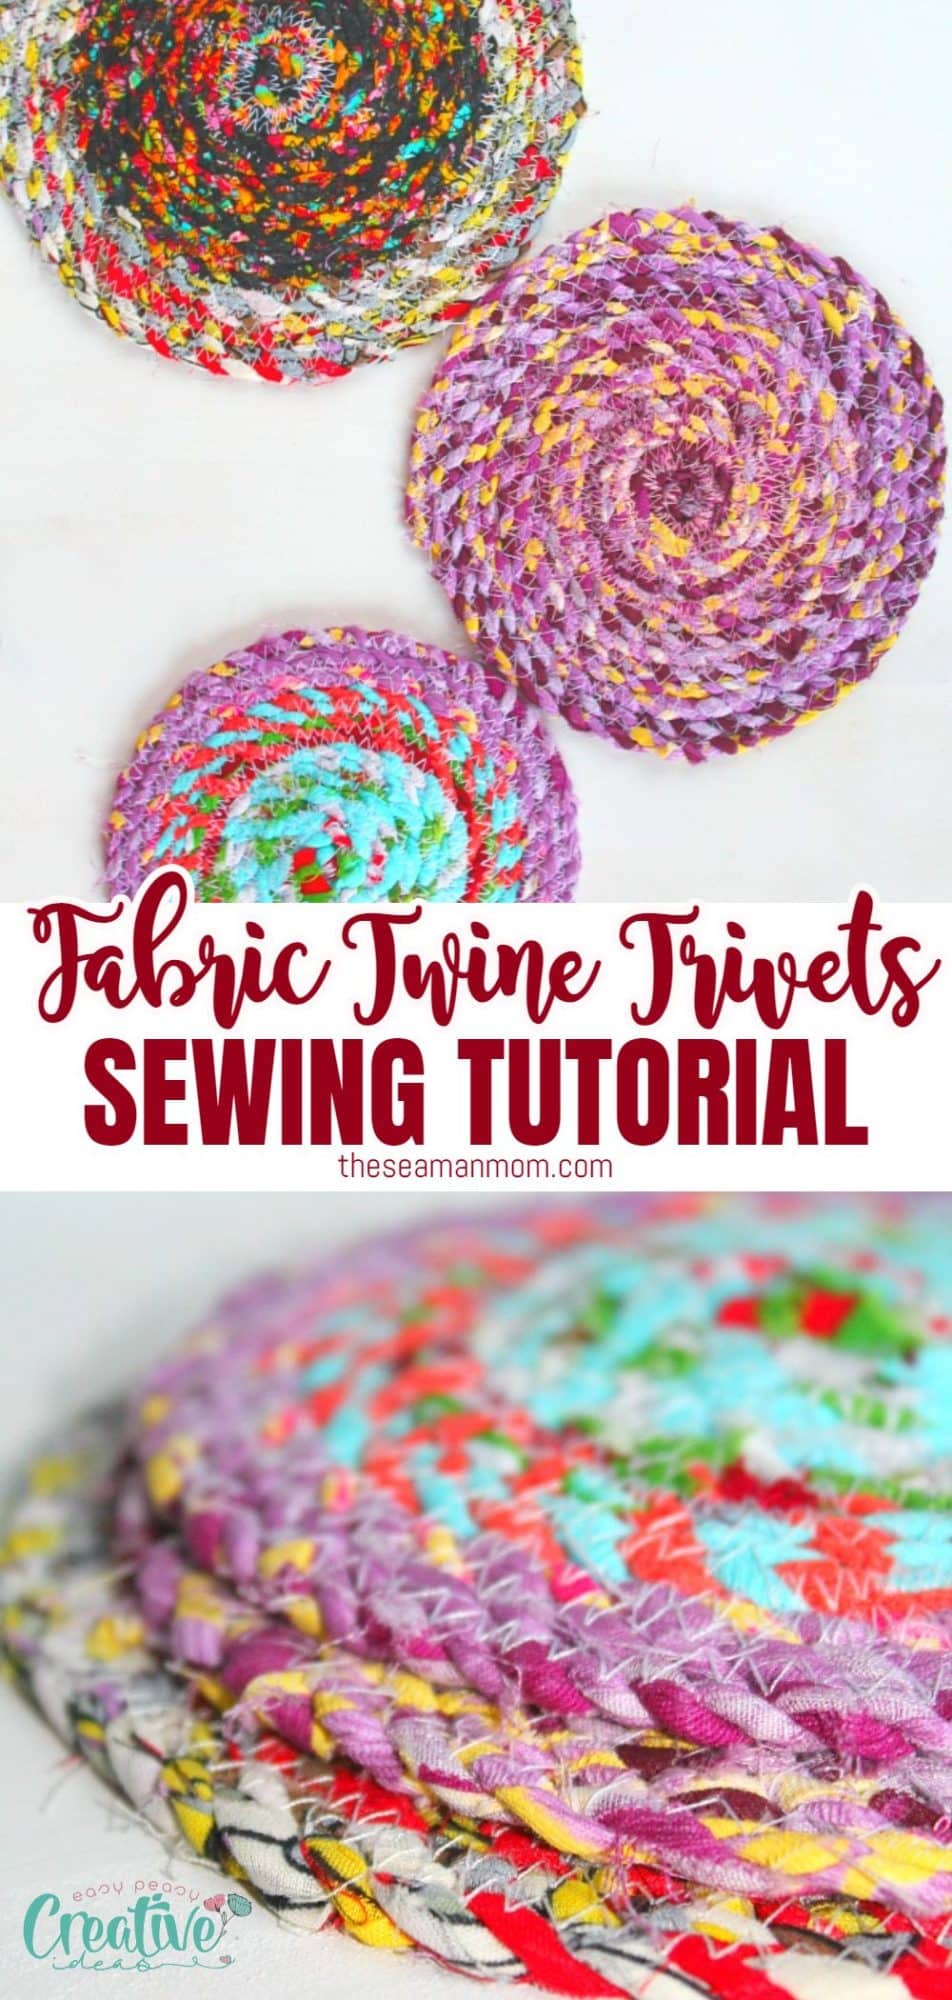 Fabric trivets sewing tutorial